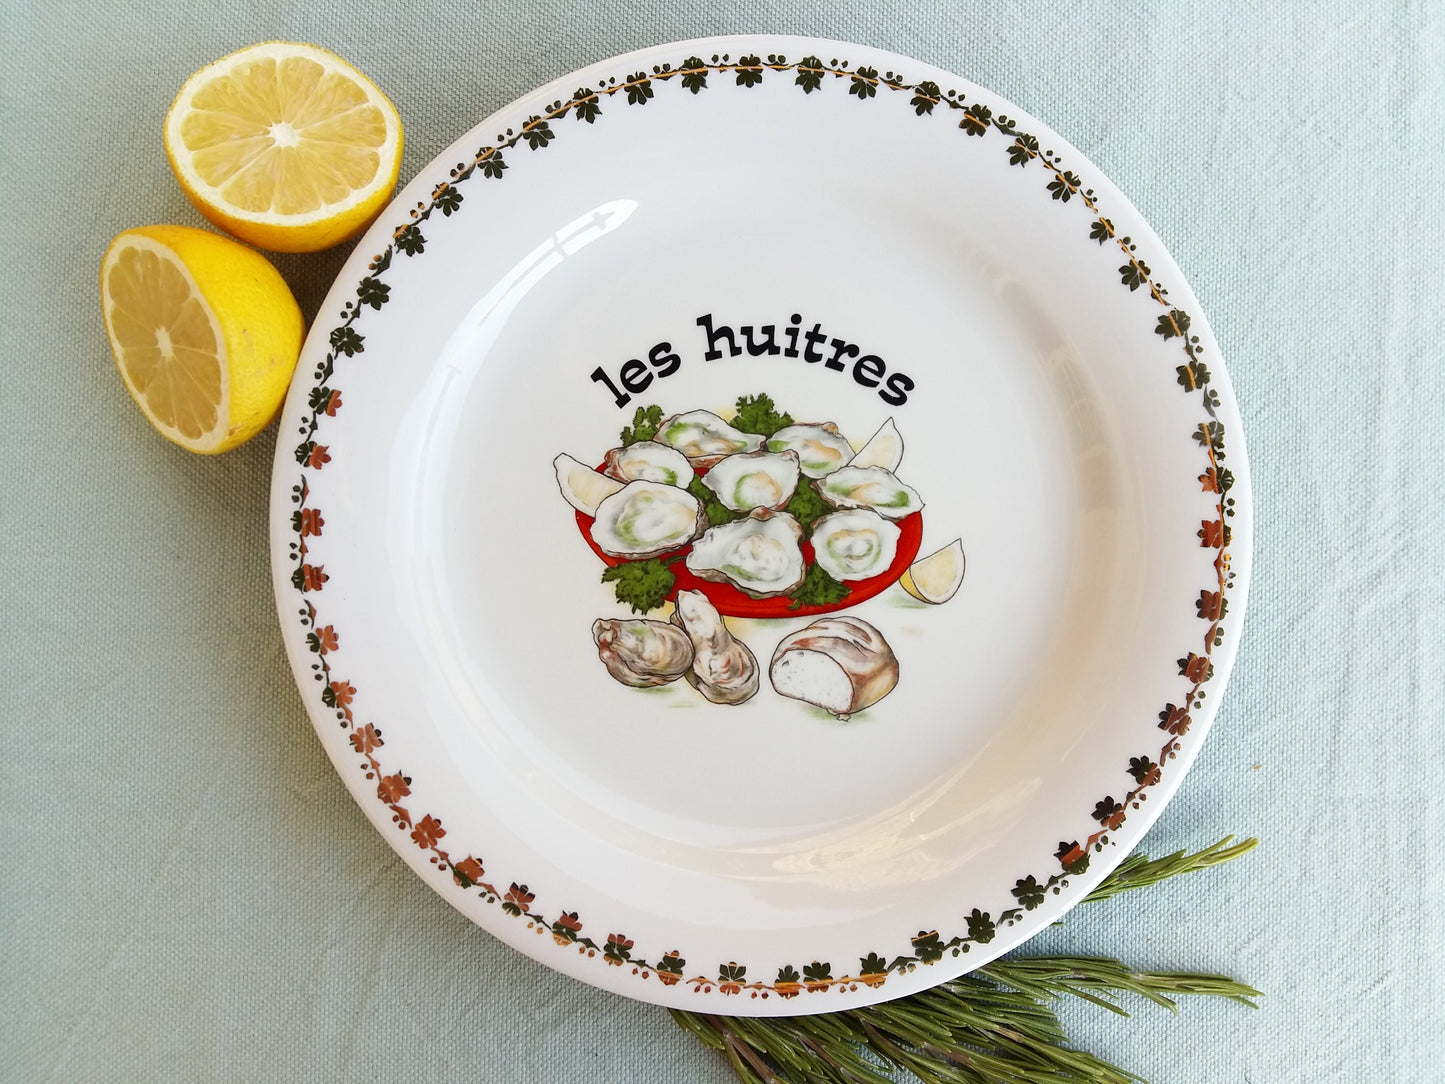 Six, Limoges Porcelain, Seafood Plates. Mid Century Shellfish Plates. from Tiggy & Pip - €156.00! Shop now at Tiggy and Pip